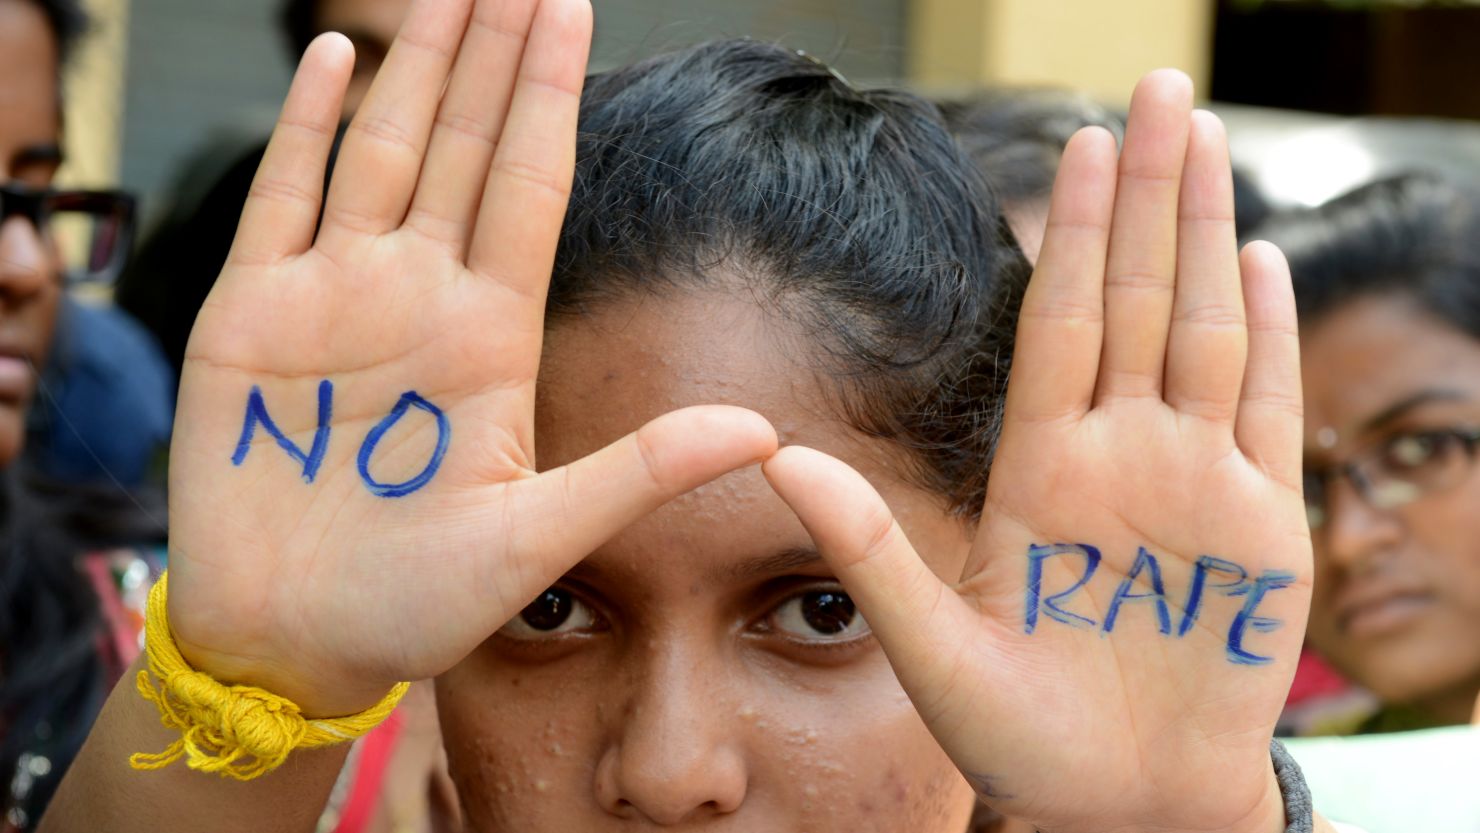 India has come under fire after alarming reports about rape.